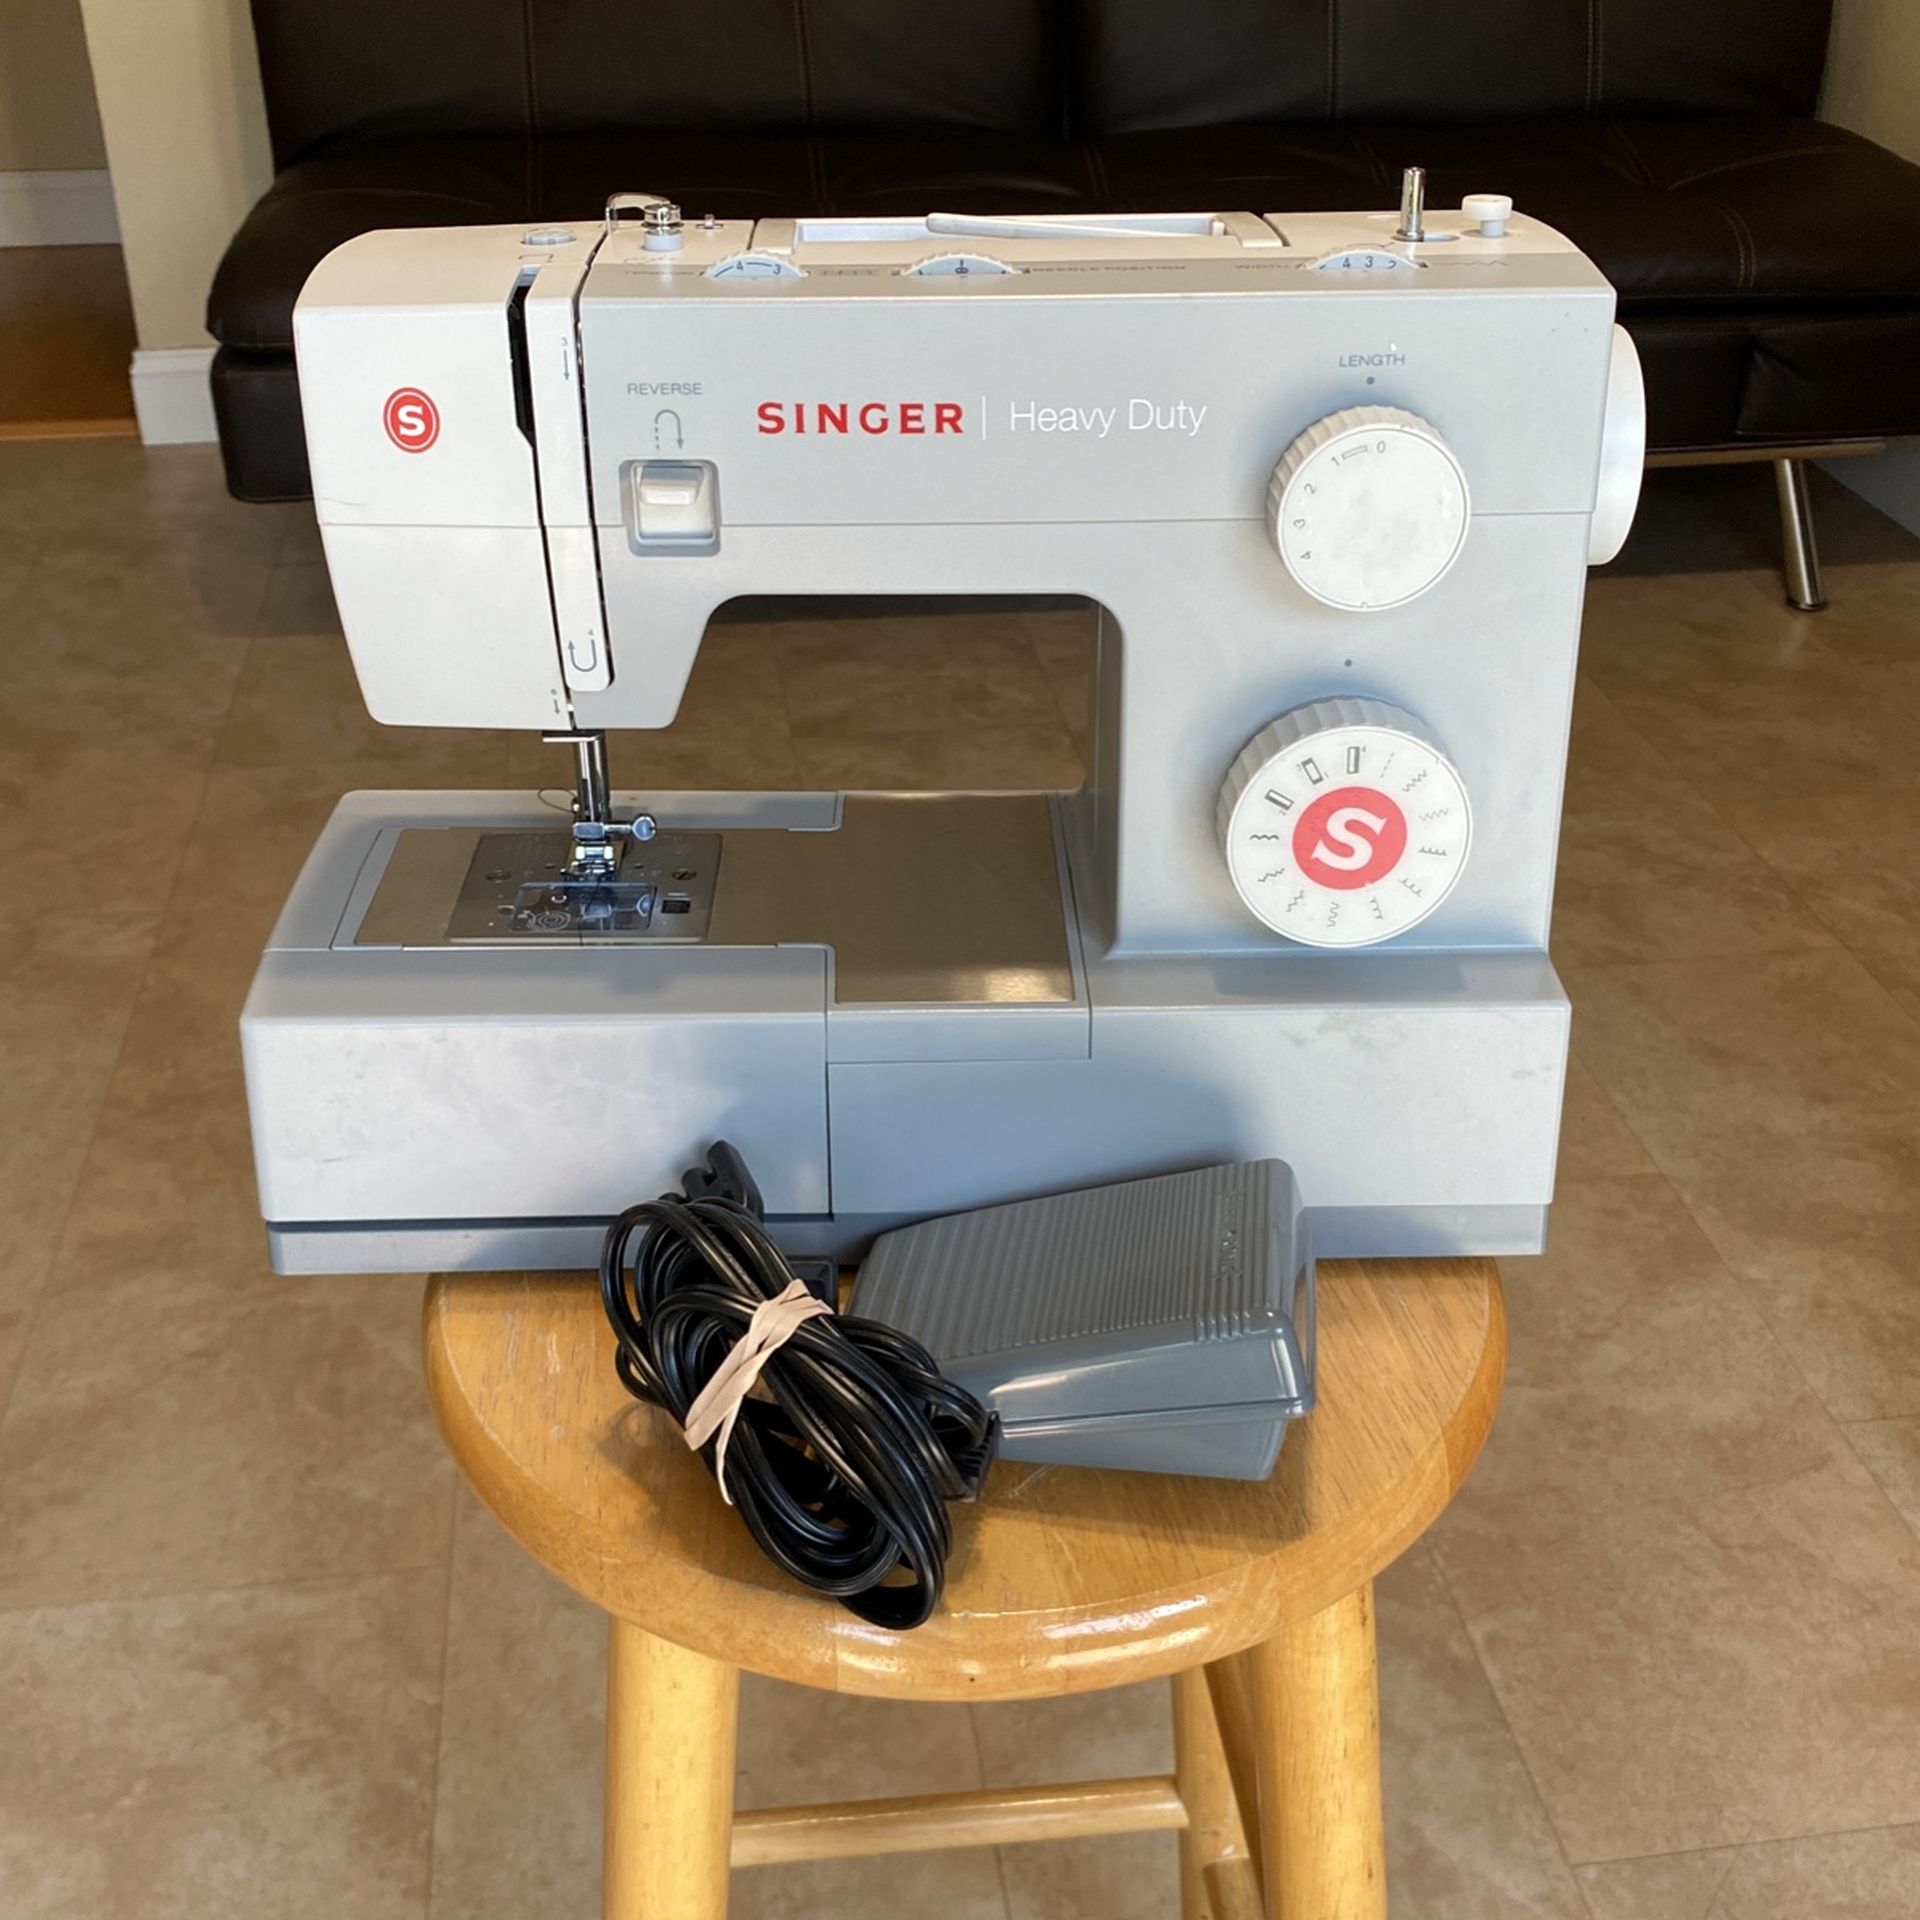 SINGER 4411 Heavy Duty Portable Sewing Machine - Grey 120W /w Cord + Pedal (Minted Condition) 